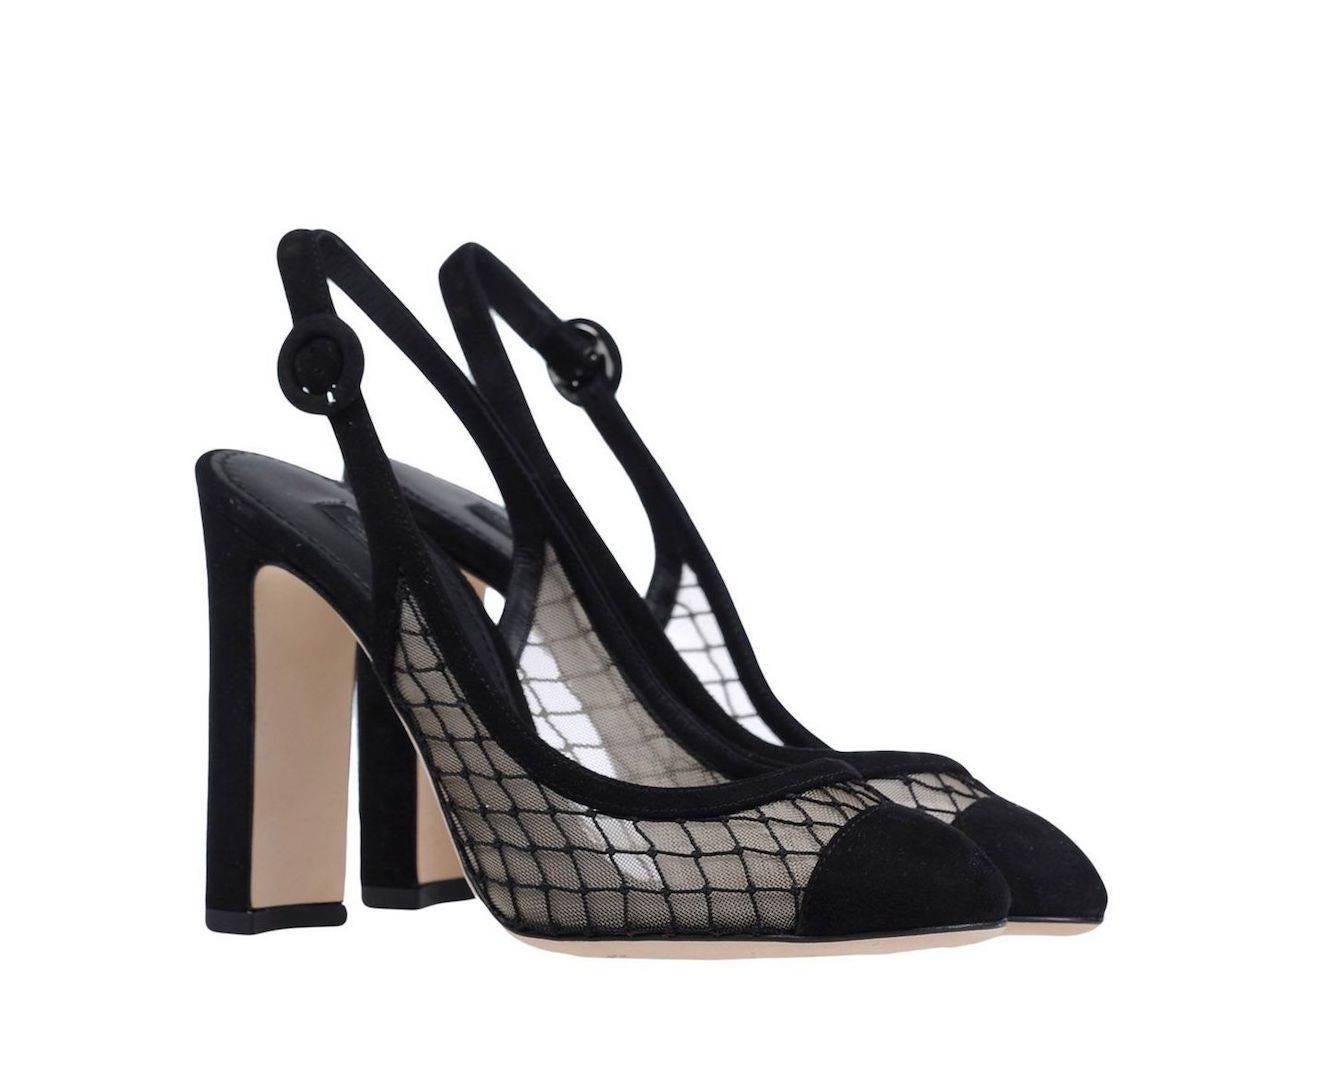 CURATOR'S NOTES

Dolce & Gabbana NEW & SOLD OUT Black Suede Mesh Heels Pumps in Box  

Size IT 36
Suede
Mesh
Adjustable buckle closure
Made in Italy
Heel height 4.25"
Includes original Dolce & Gabbana box